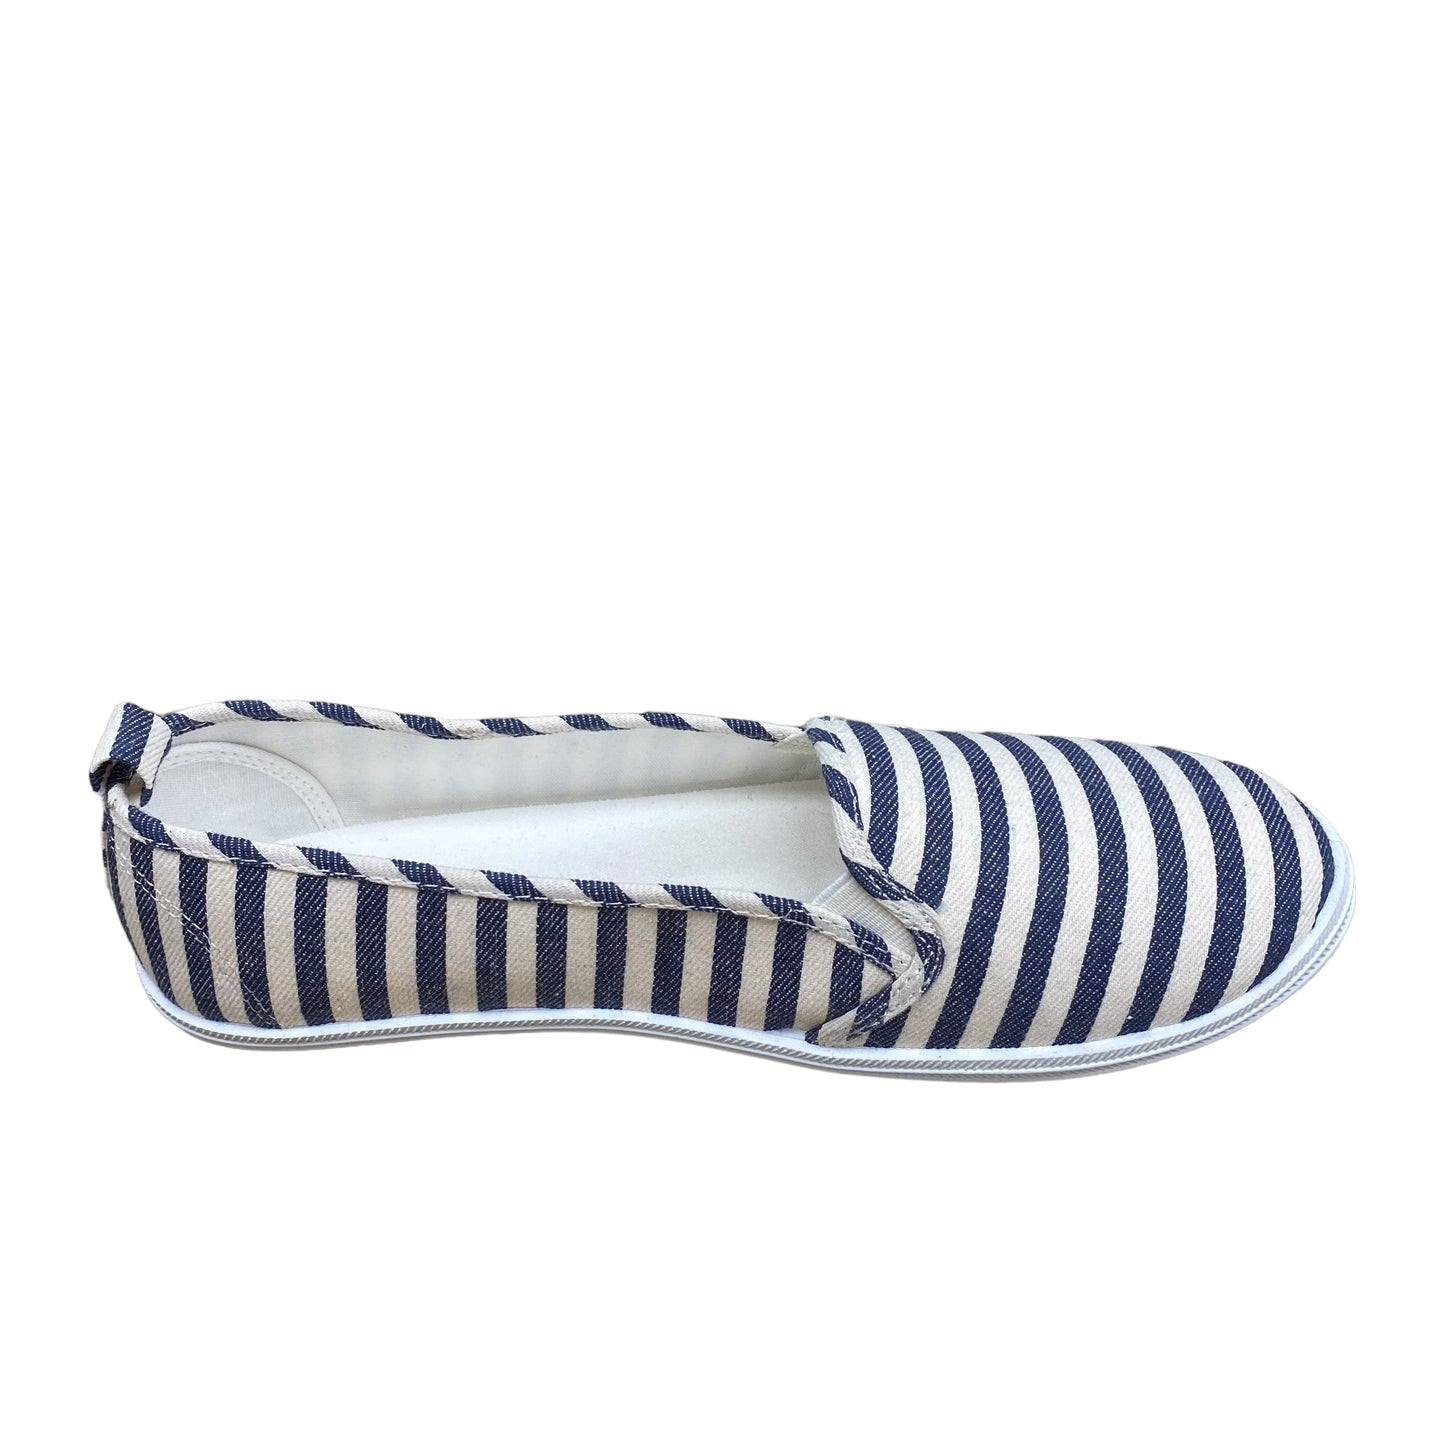 Shoes Flats Boat By Cmc  Size: 9.5